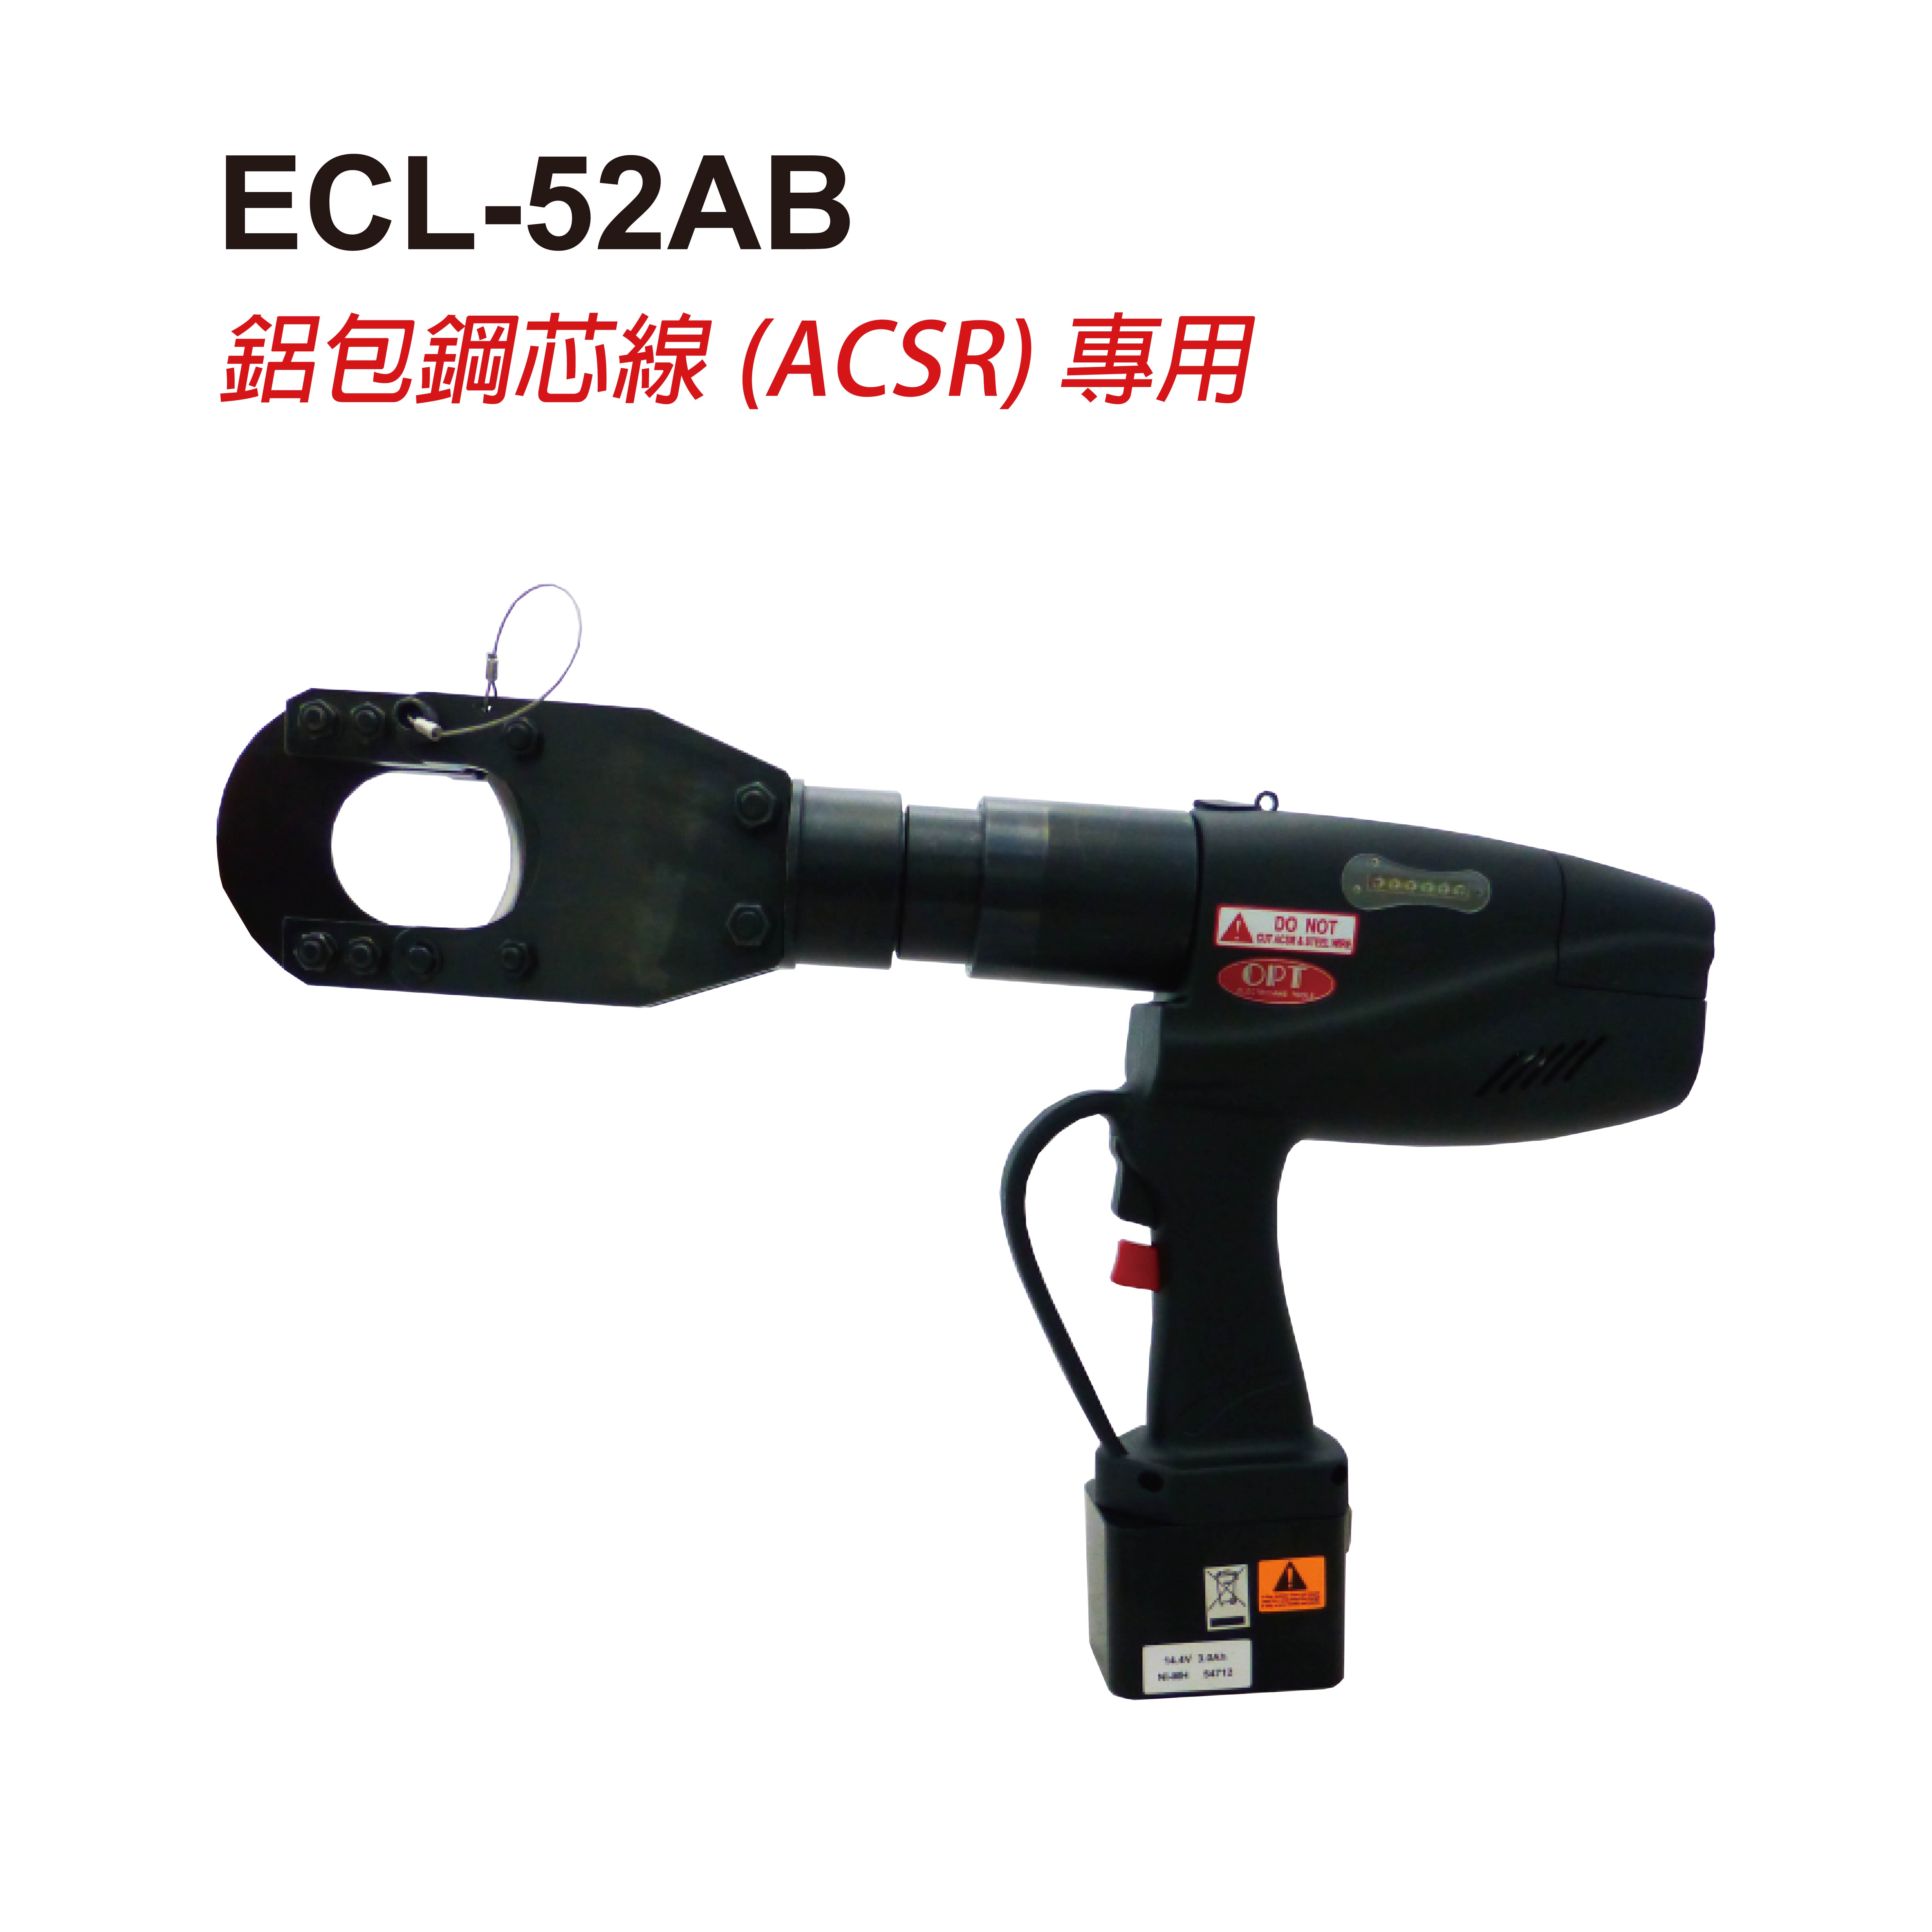 ECL-52AB CORDLESS HYDRAULIC CABLE CUTTERS